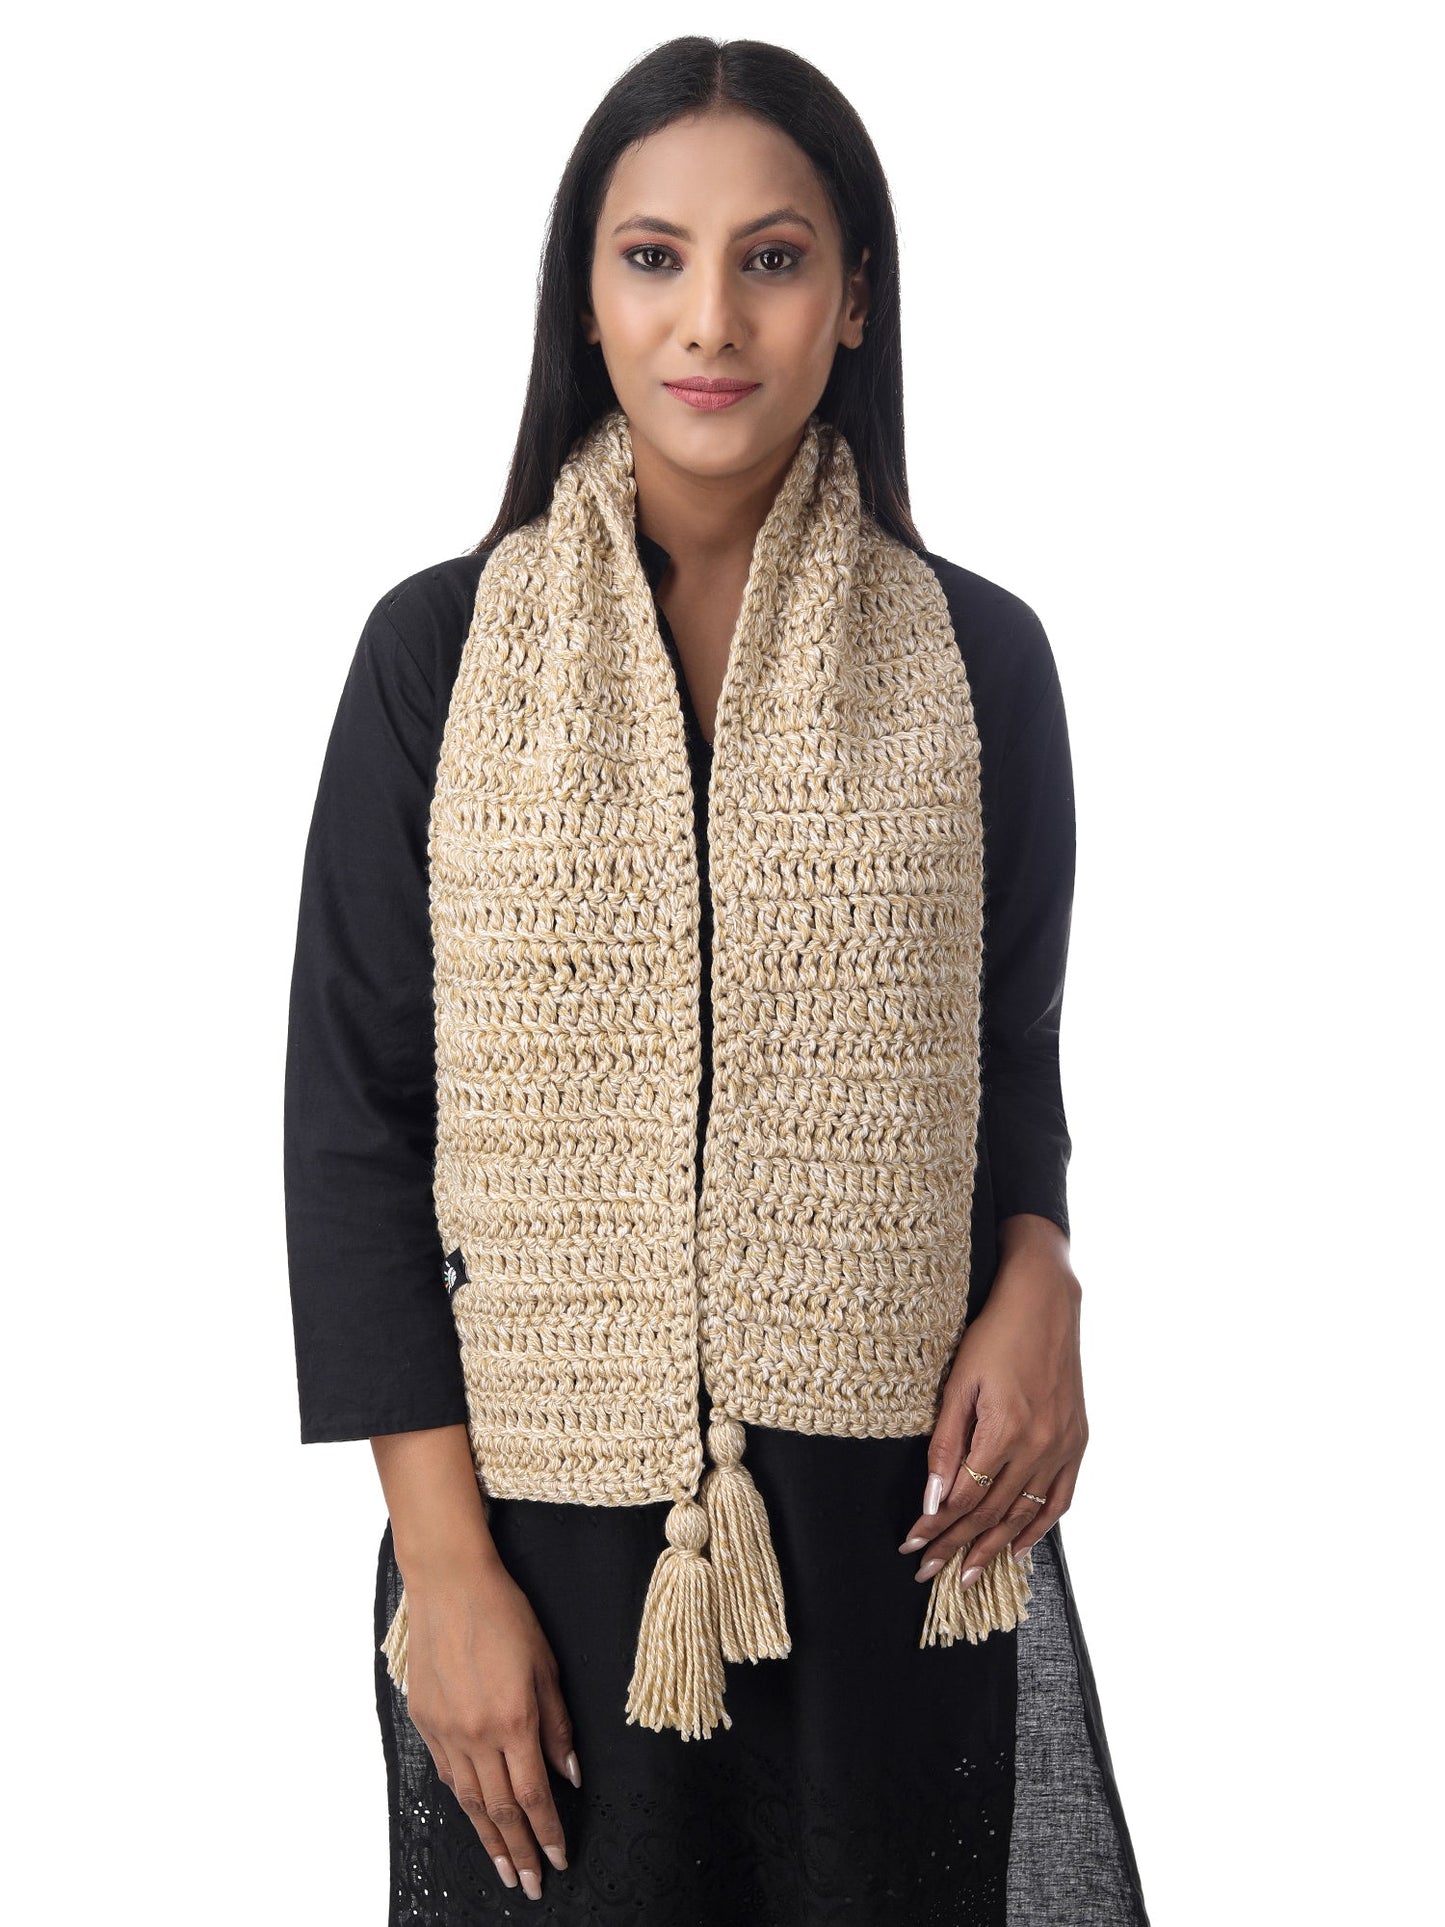 Neutral Tone Crochet Scarf Happy Cultures